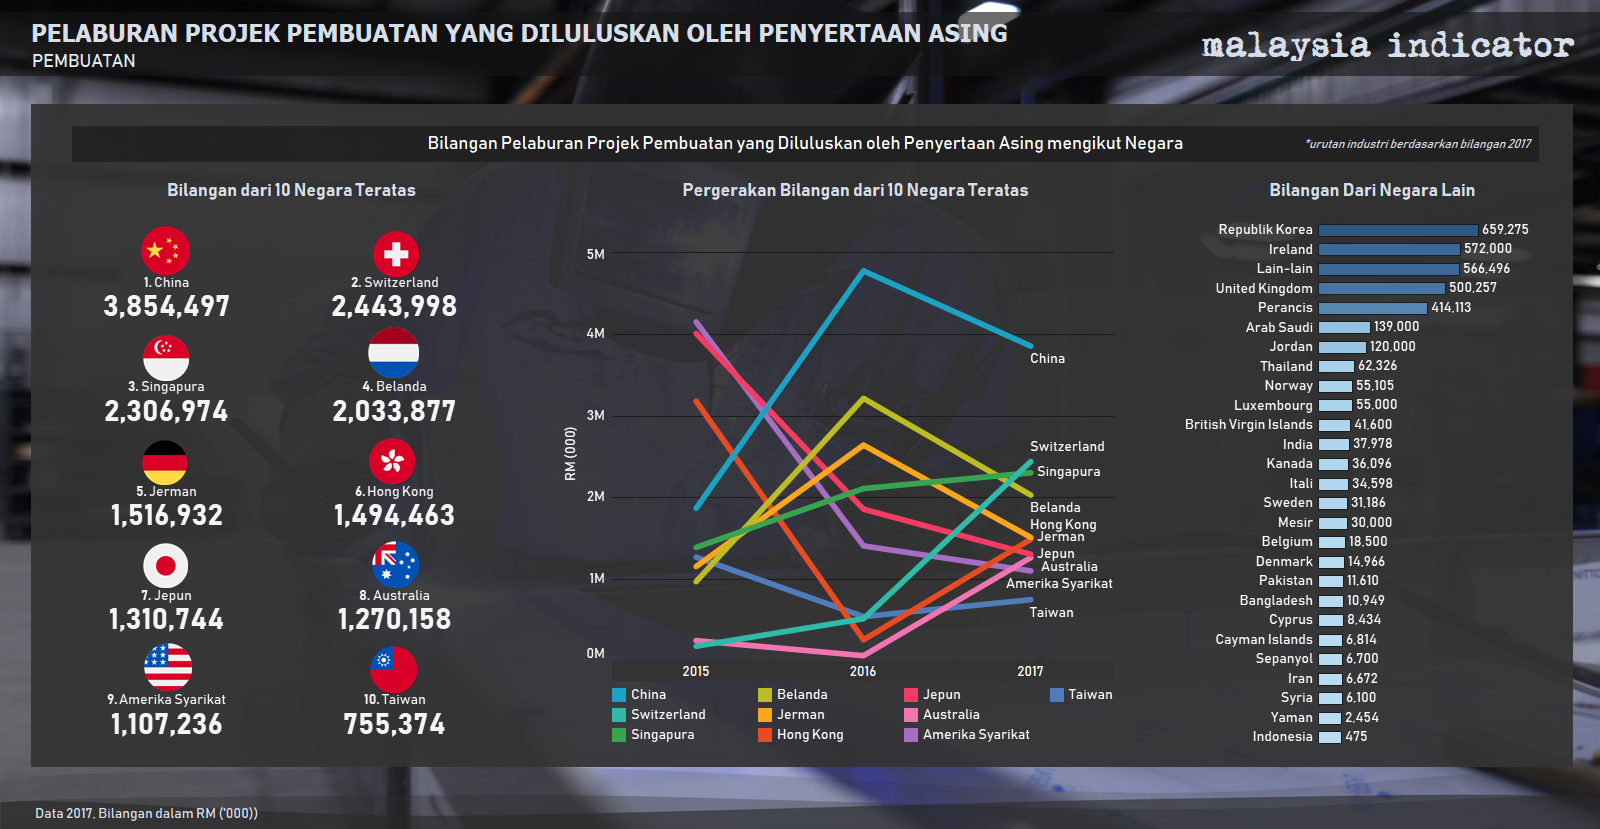 Malaysia, Malaysia Indicator, manufacturing sector, foreign investment, economy